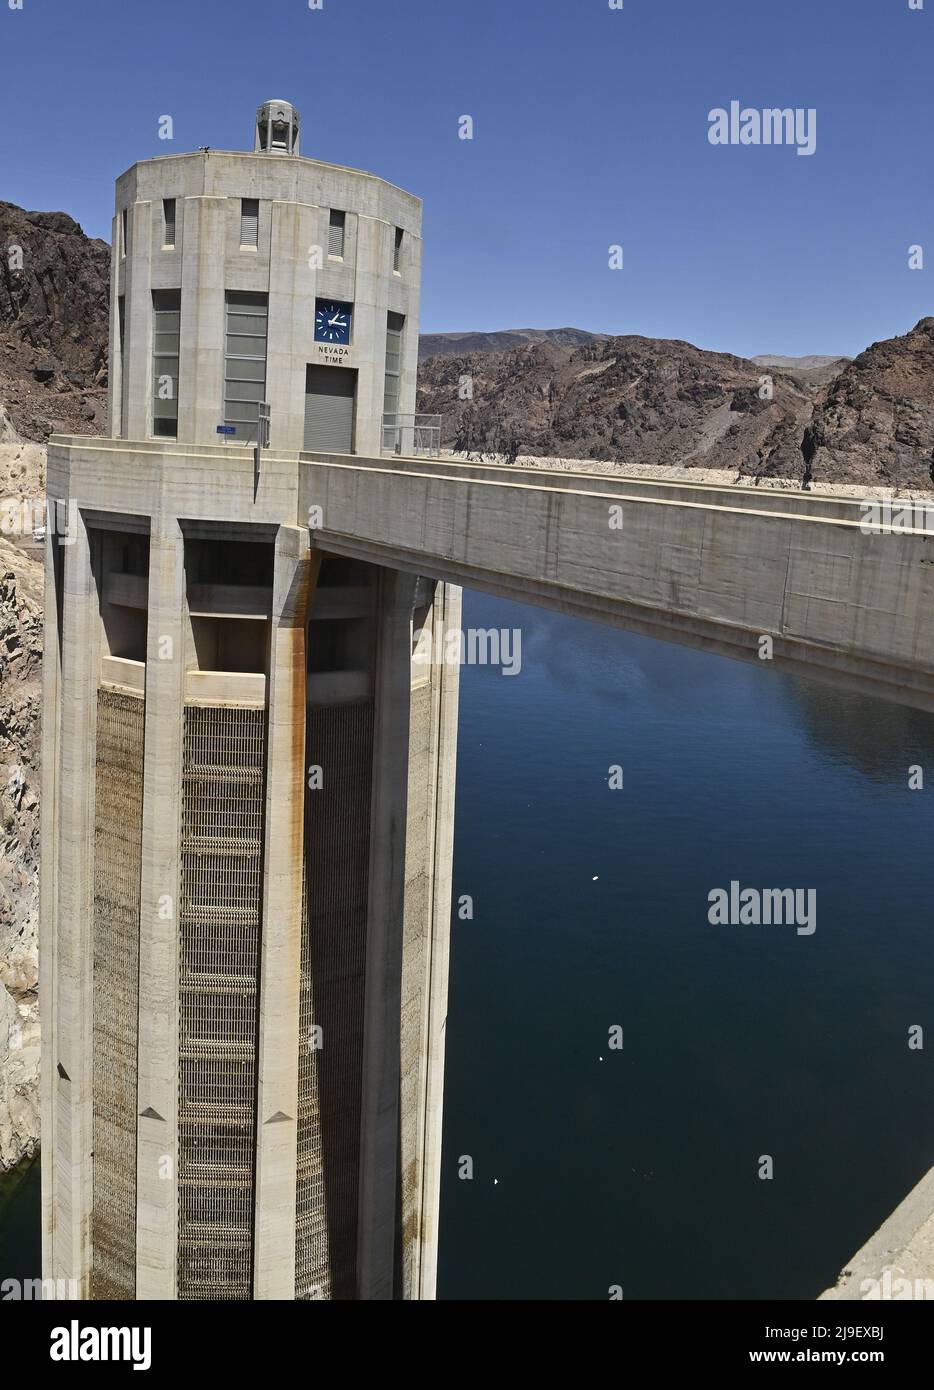 Where Does Las Vegas's Water Supply Come From?